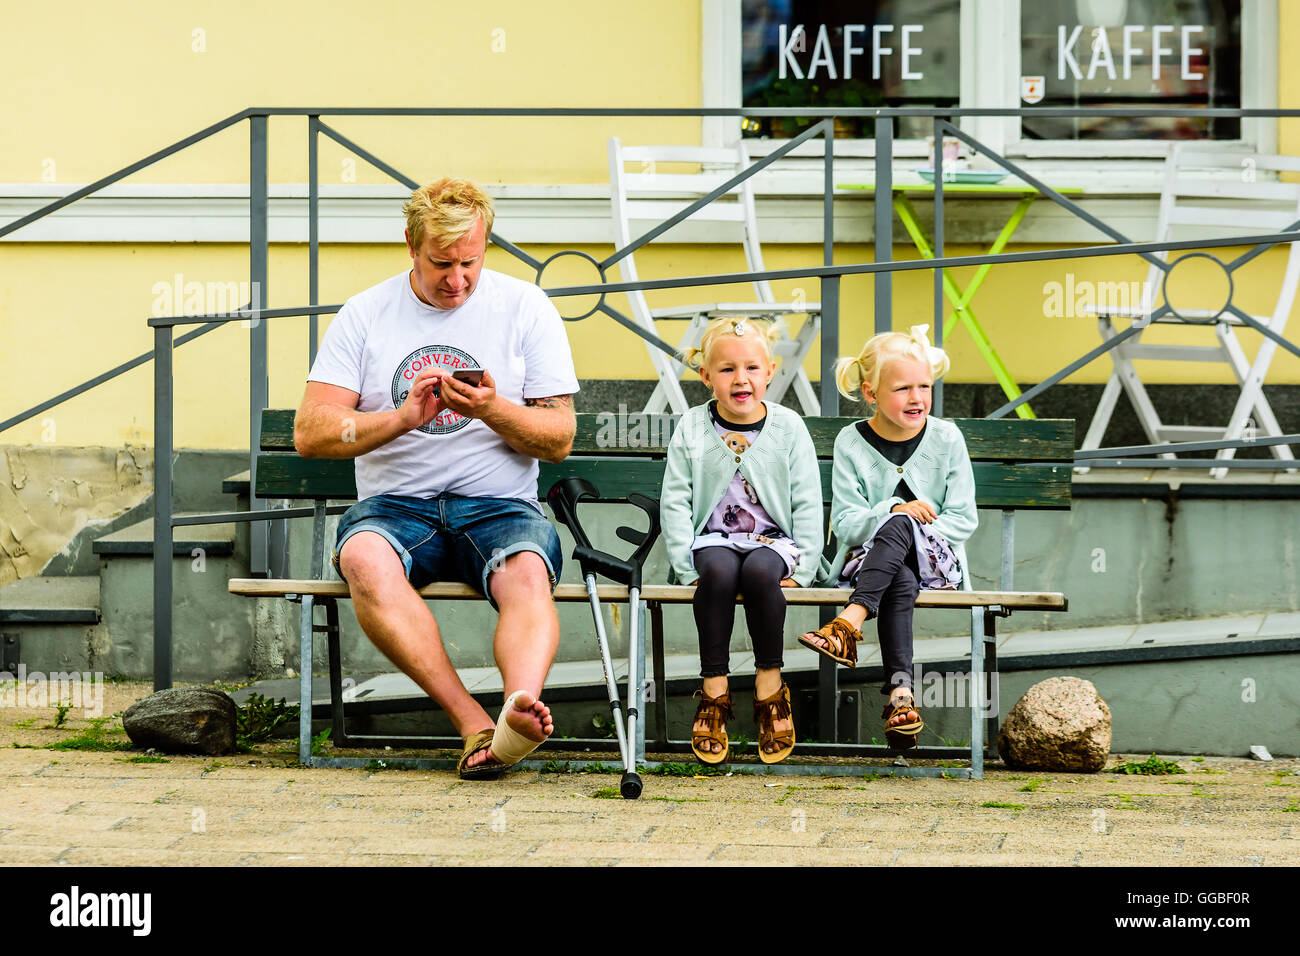 Ystad, Sweden - August 1, 2016: Real people in everyday life. Adult man with crutches and a hurt foot sit beside two lovely girl Stock Photo